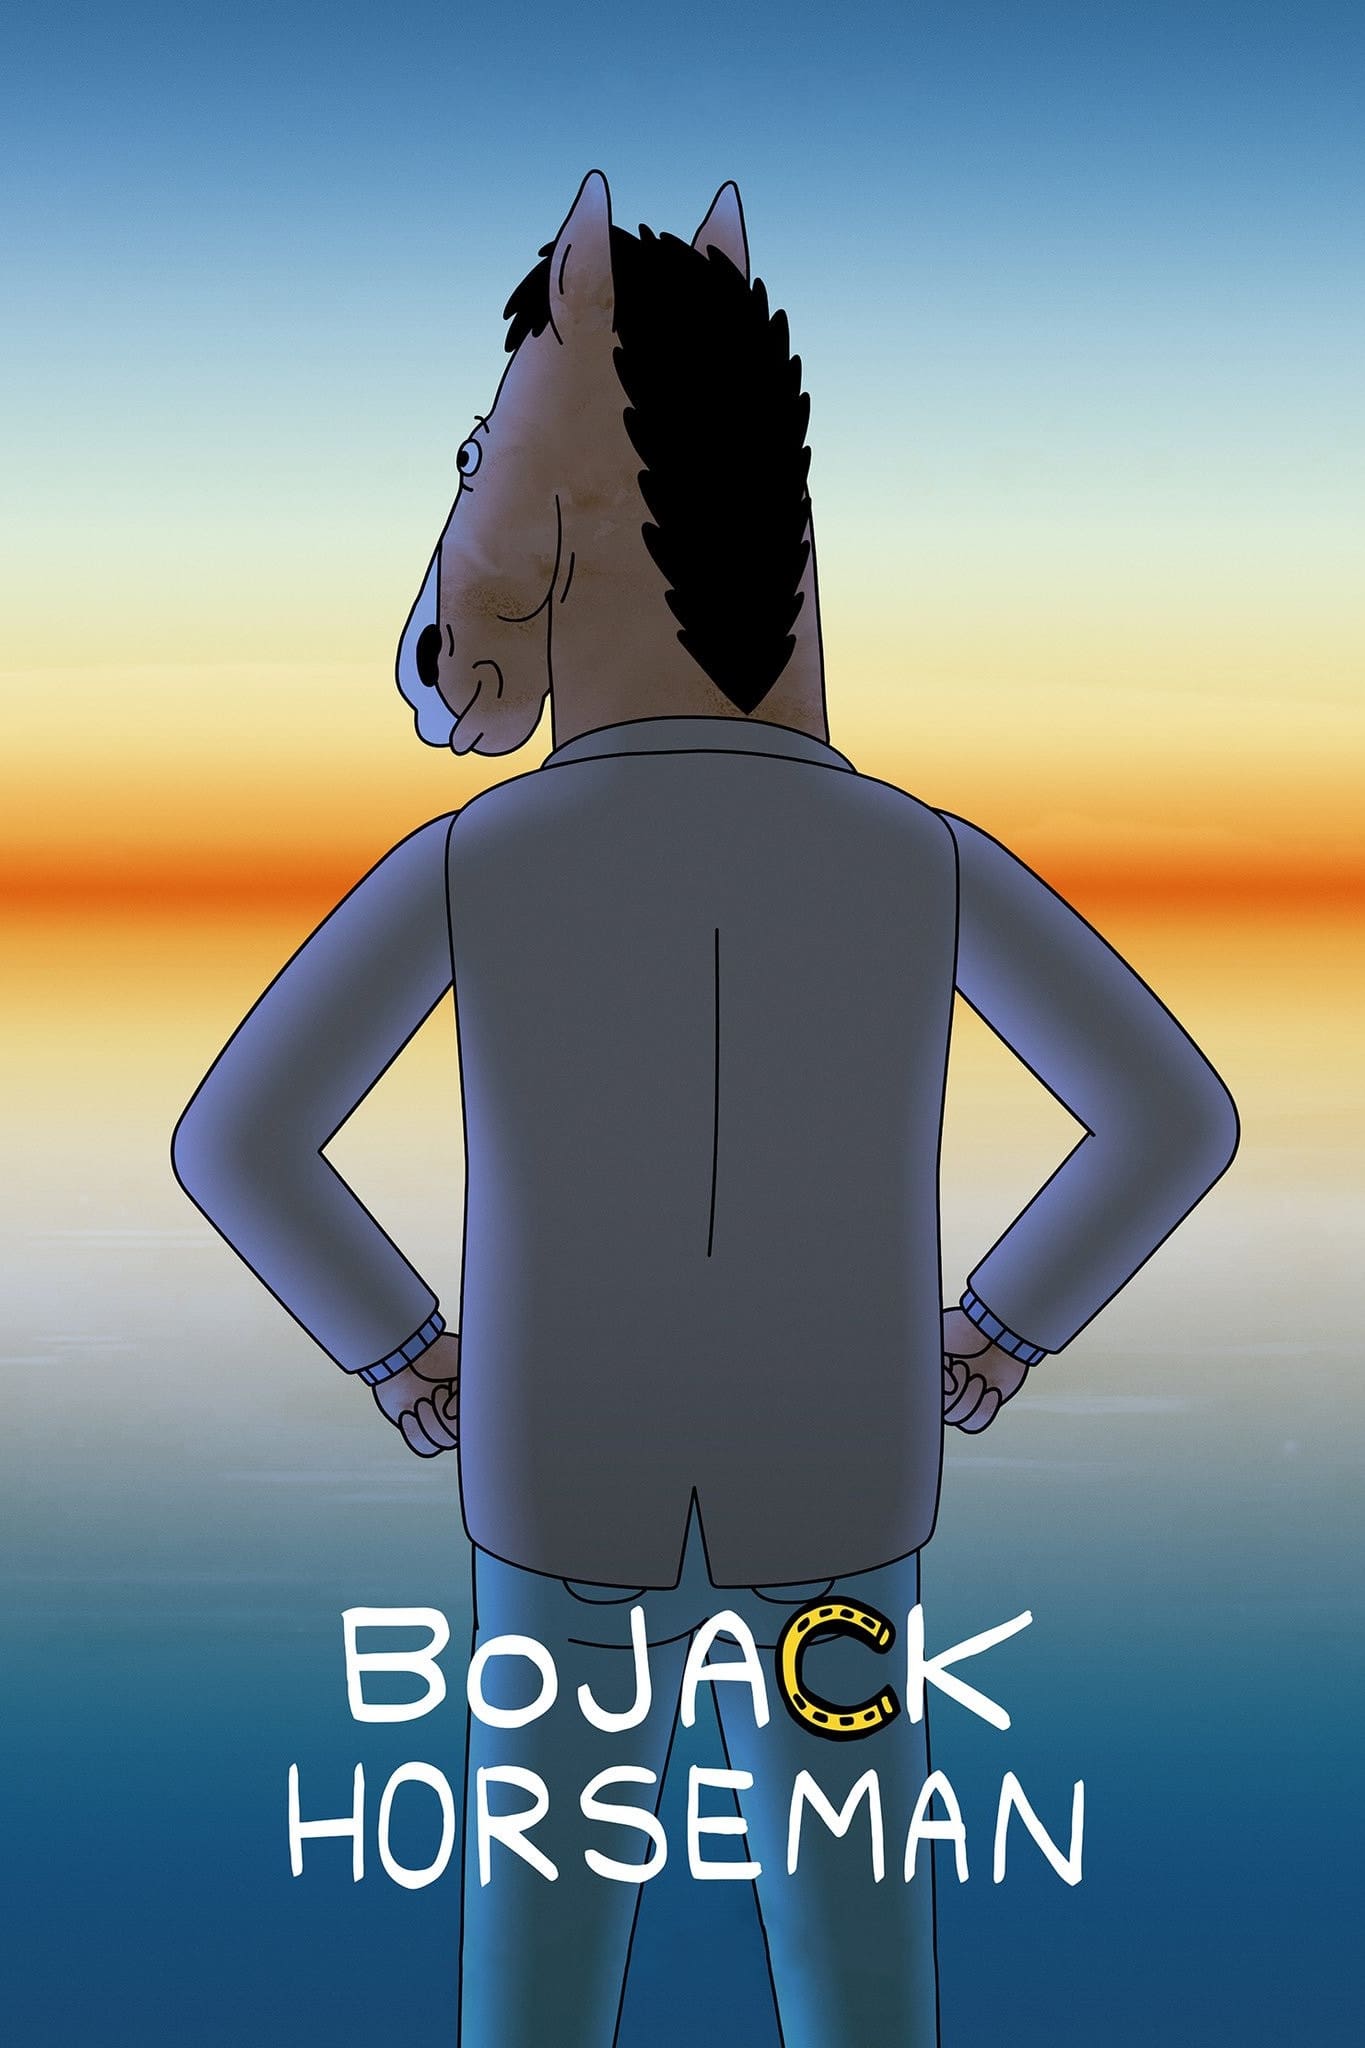 BoJack Horseman TV Shows About Show Business